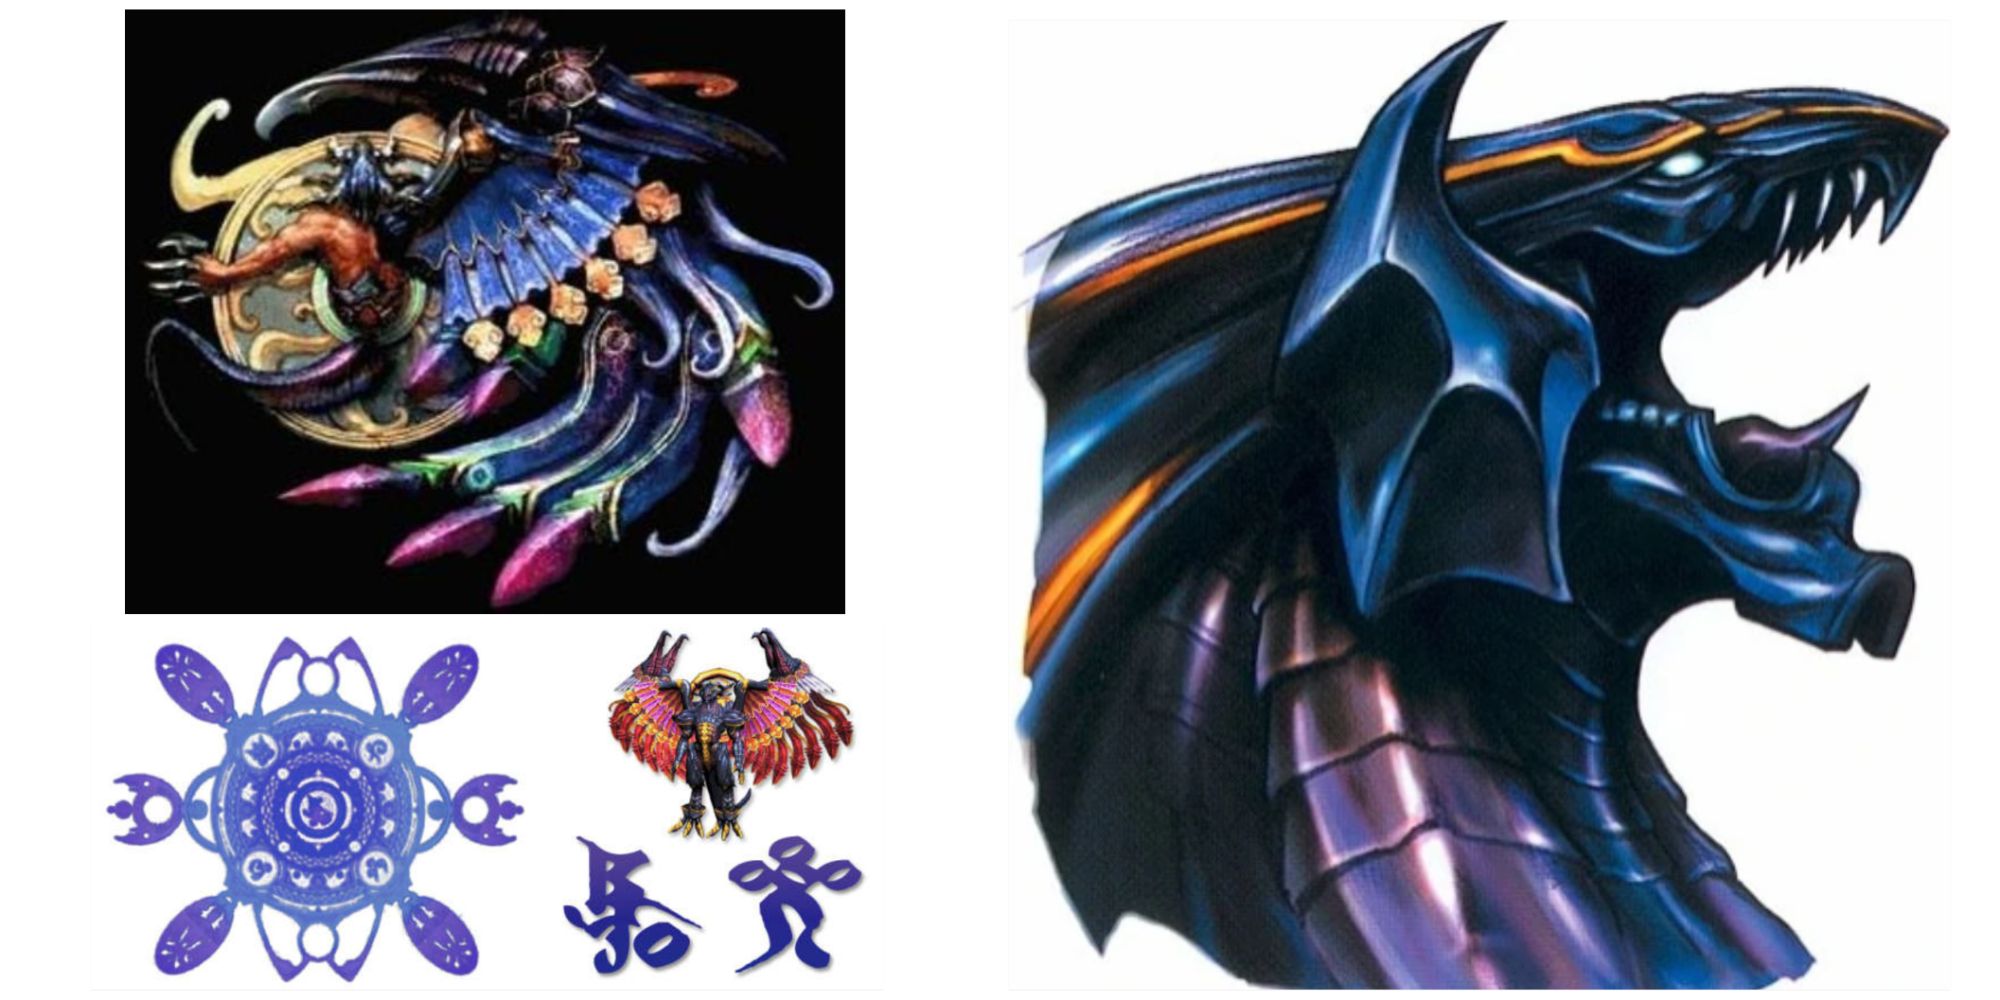 Final Fantasy X Bahamut, featuring his in-game picture, fayth statue, summoning glyph and symbol, and model / sprite